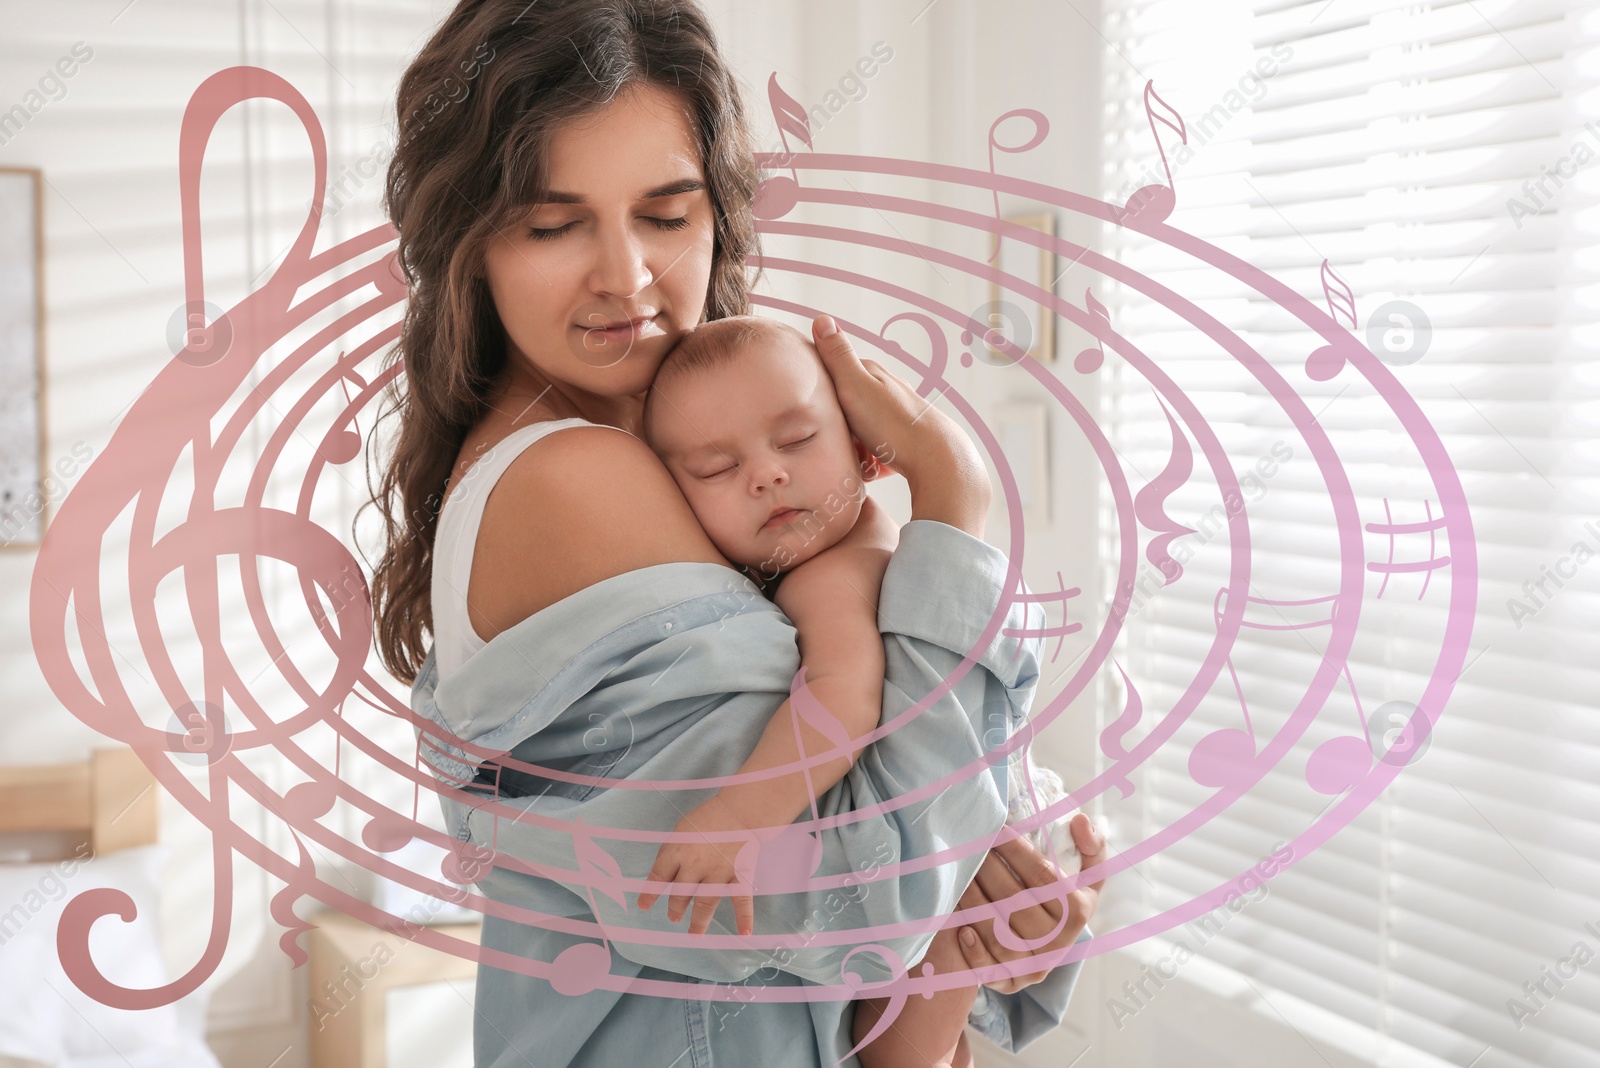 Image of Mother singing lullaby to her sleepy baby at home. Music notes illustrations flying around woman and child